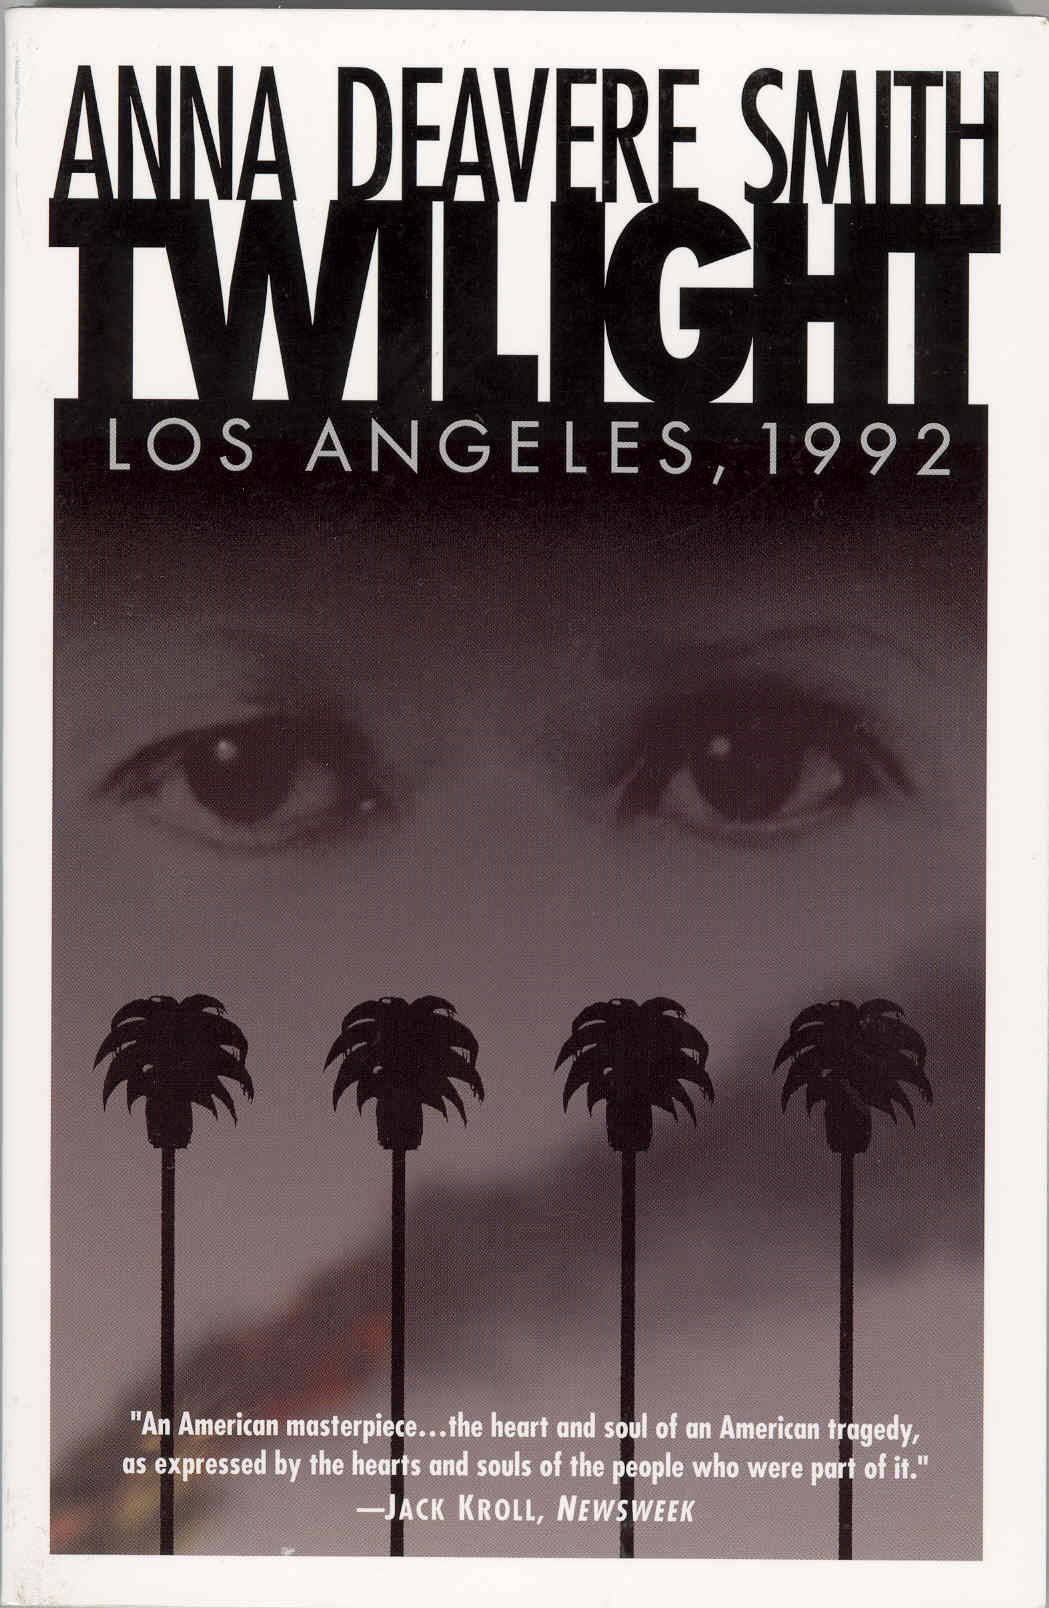 Twilight: Los Angeles, 1992 by Anna Deavere Smith